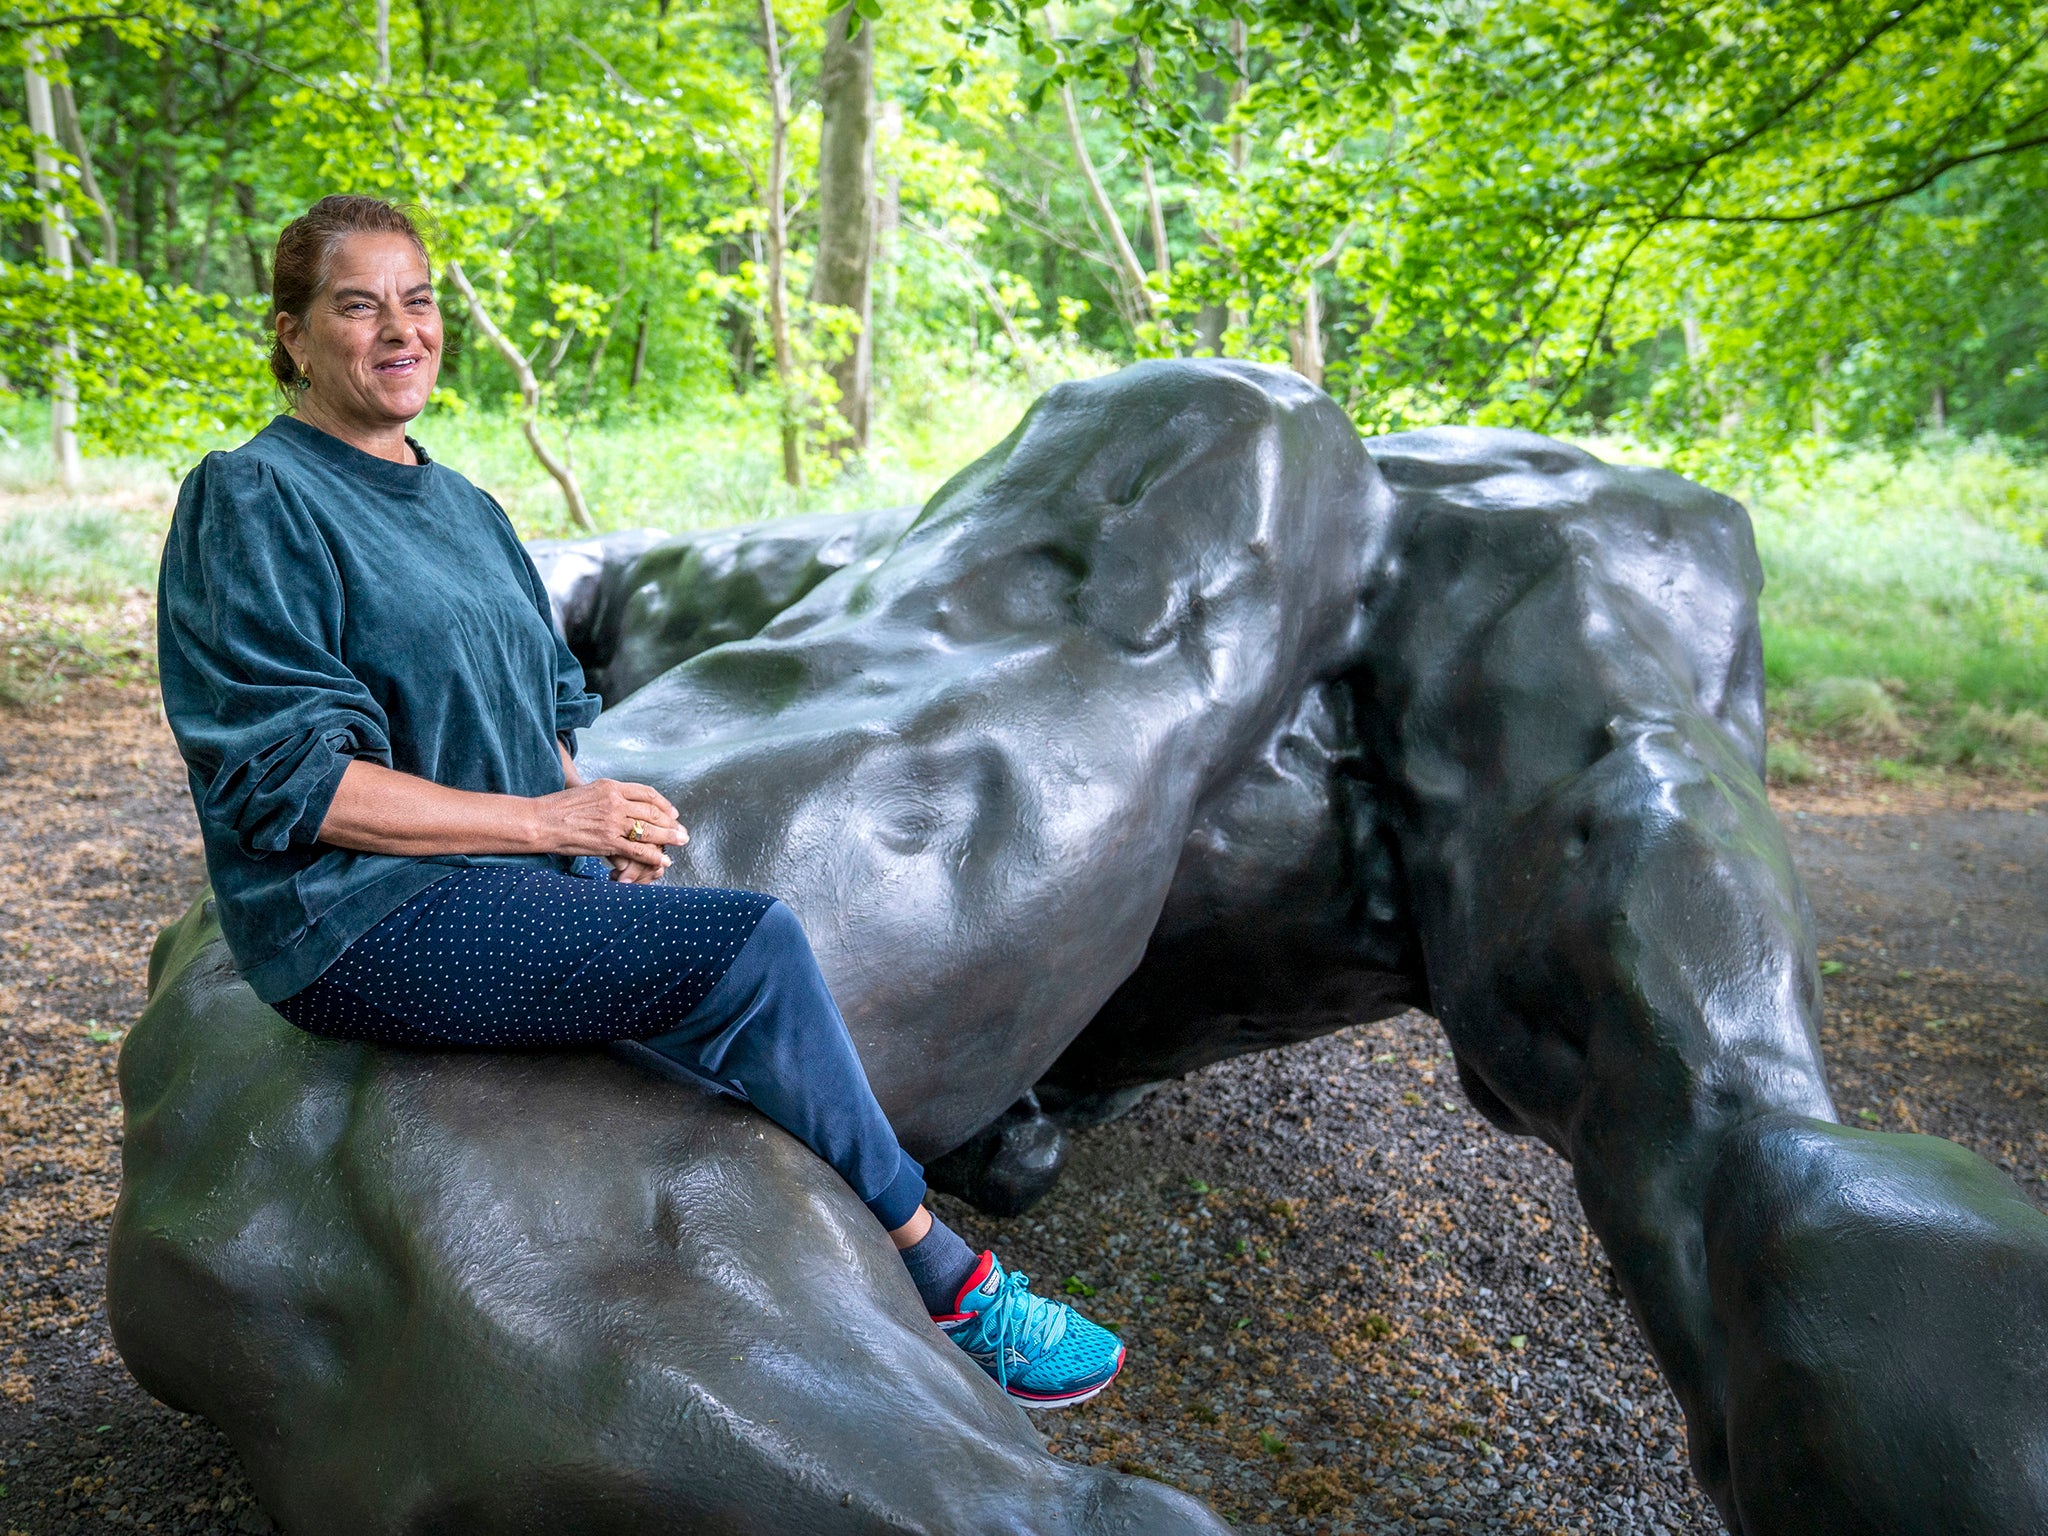 Tracey Emin unveils a new 6m bronze sculpture ‘I Lay Here For You’